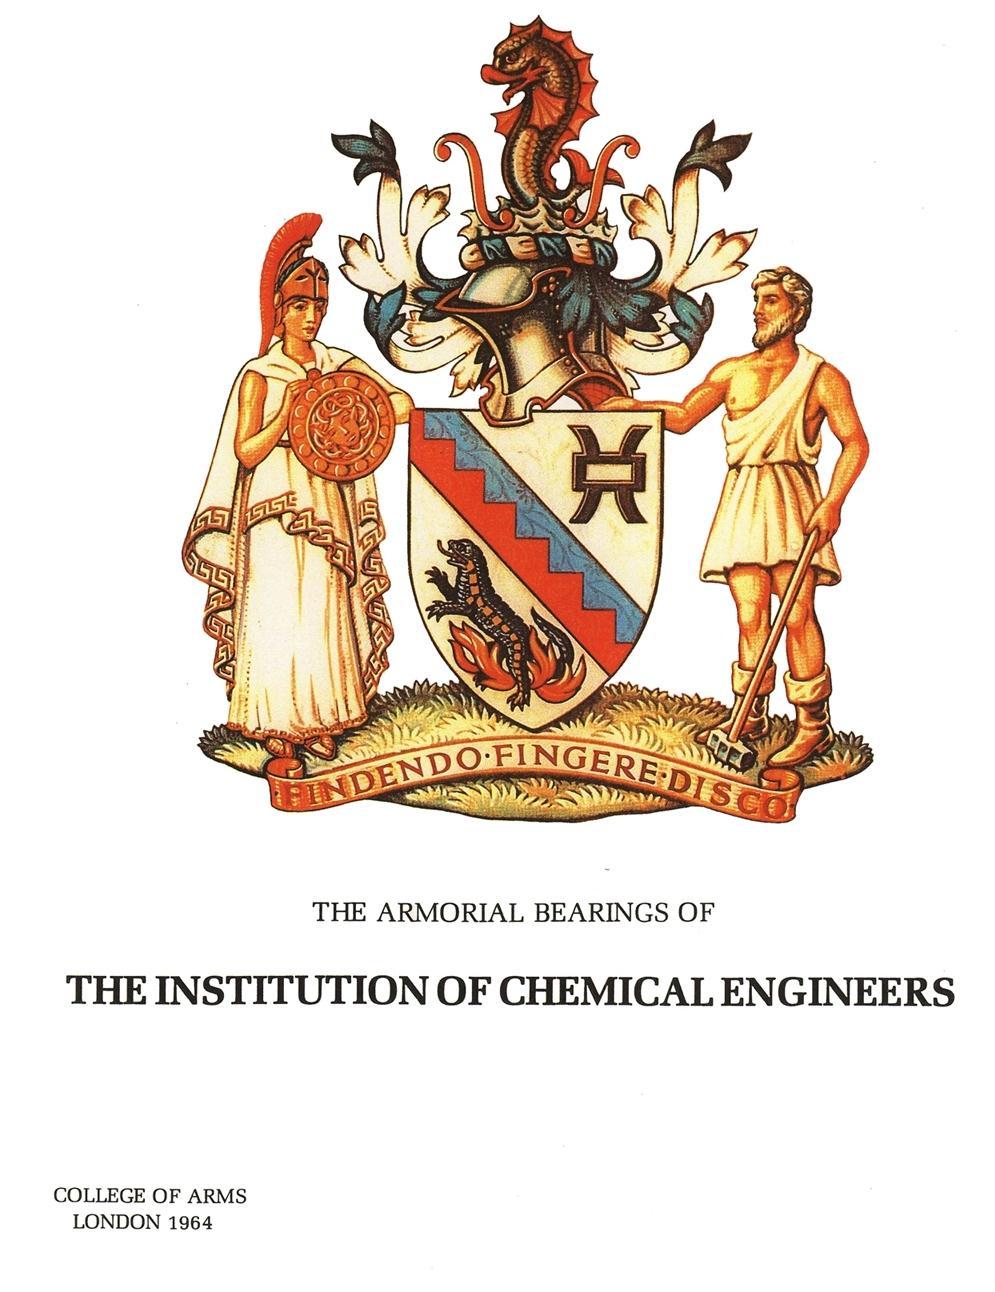 JUNE 2018 Royal Charter & By-laws Institution of Chemical Engineers Davis Building